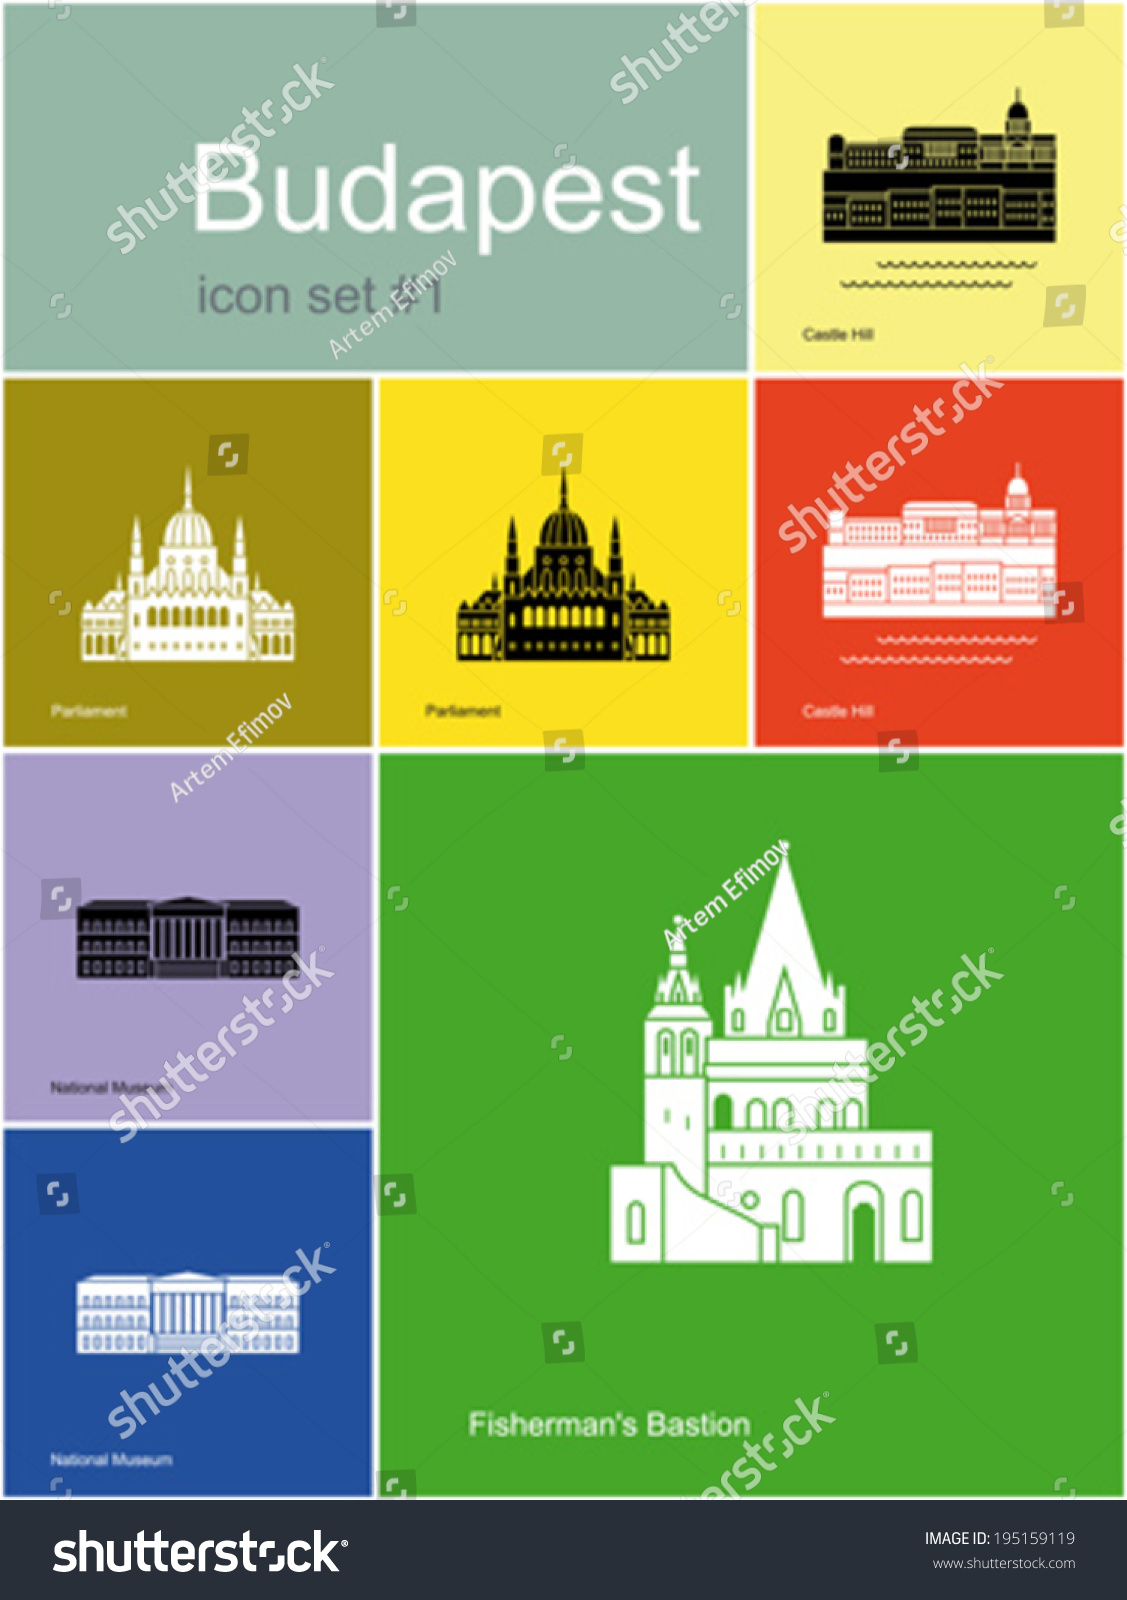 SVG of Landmarks of Budapest. Set of flat color icons in Metro style. Editable vector illustration. svg